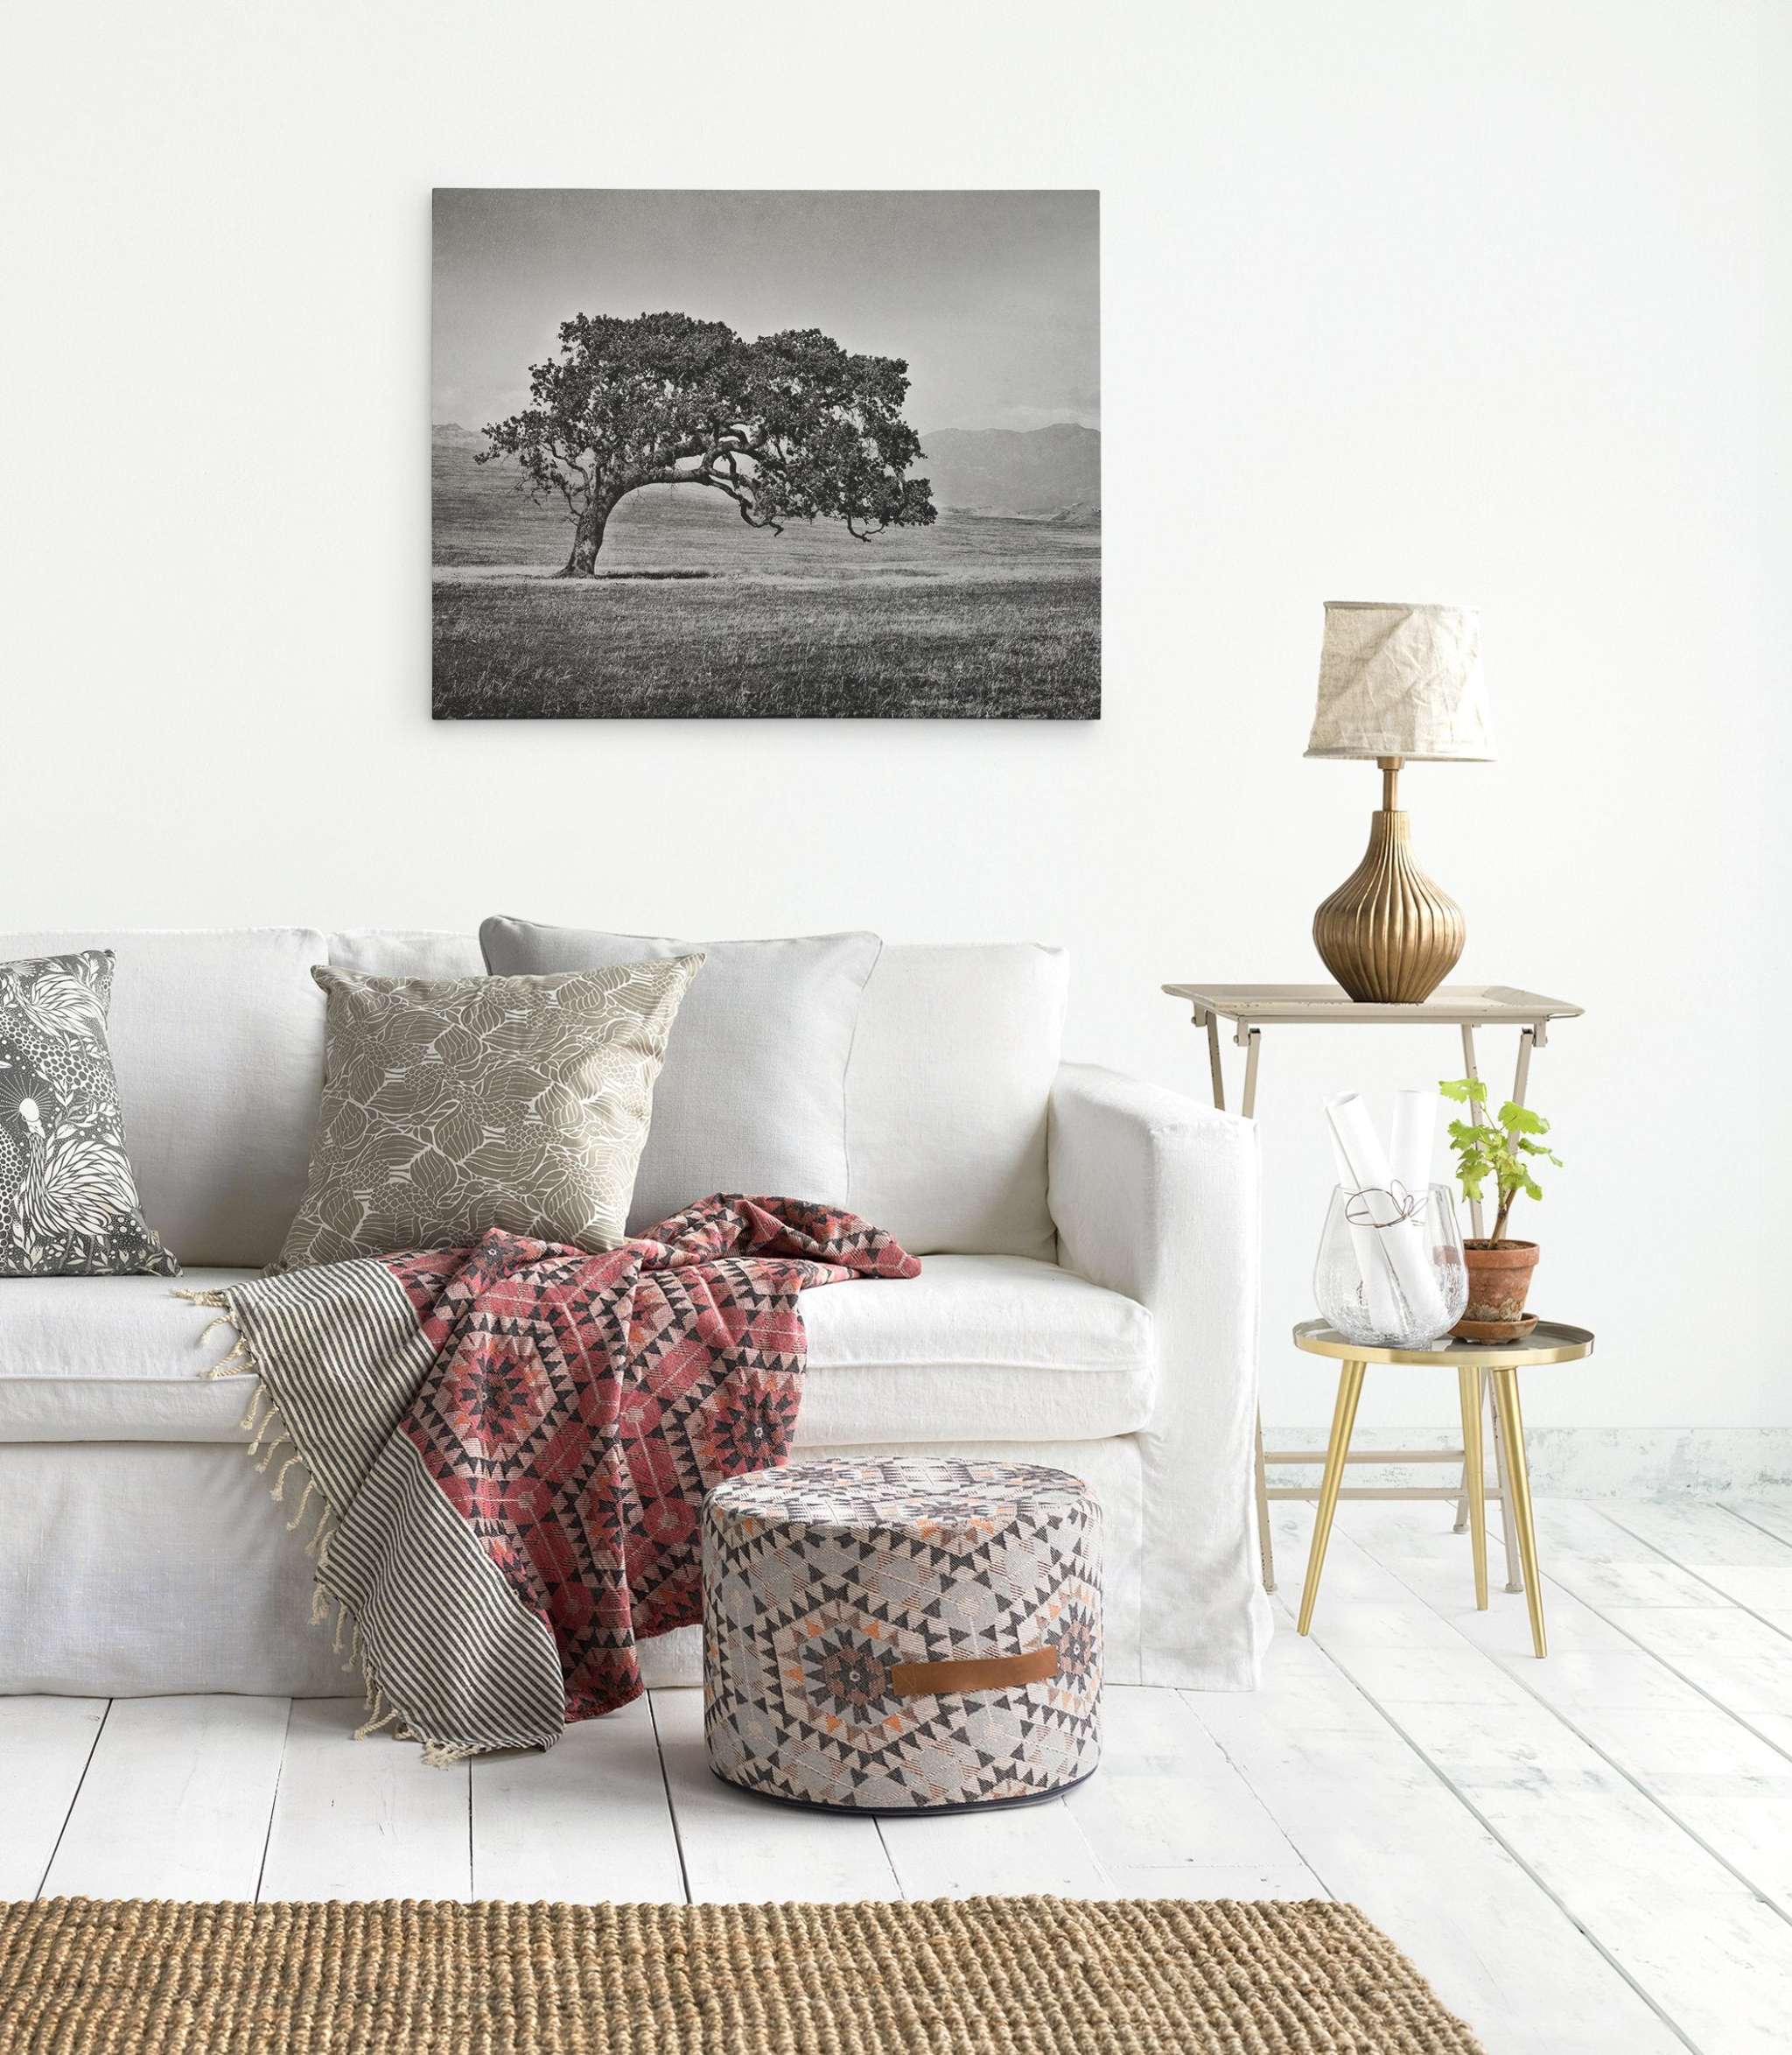 A bright living room features a white sofa with patterned and plain cushions, and a decorative blanket. A patterned ottoman sits in front. Beside the sofa, a small table holds a lamp and small potted plants. A ready-to-hang Californian Oak Tree Landscape Canvas, 'Windswept (Black and White)' by Offley Green adorns the wall.